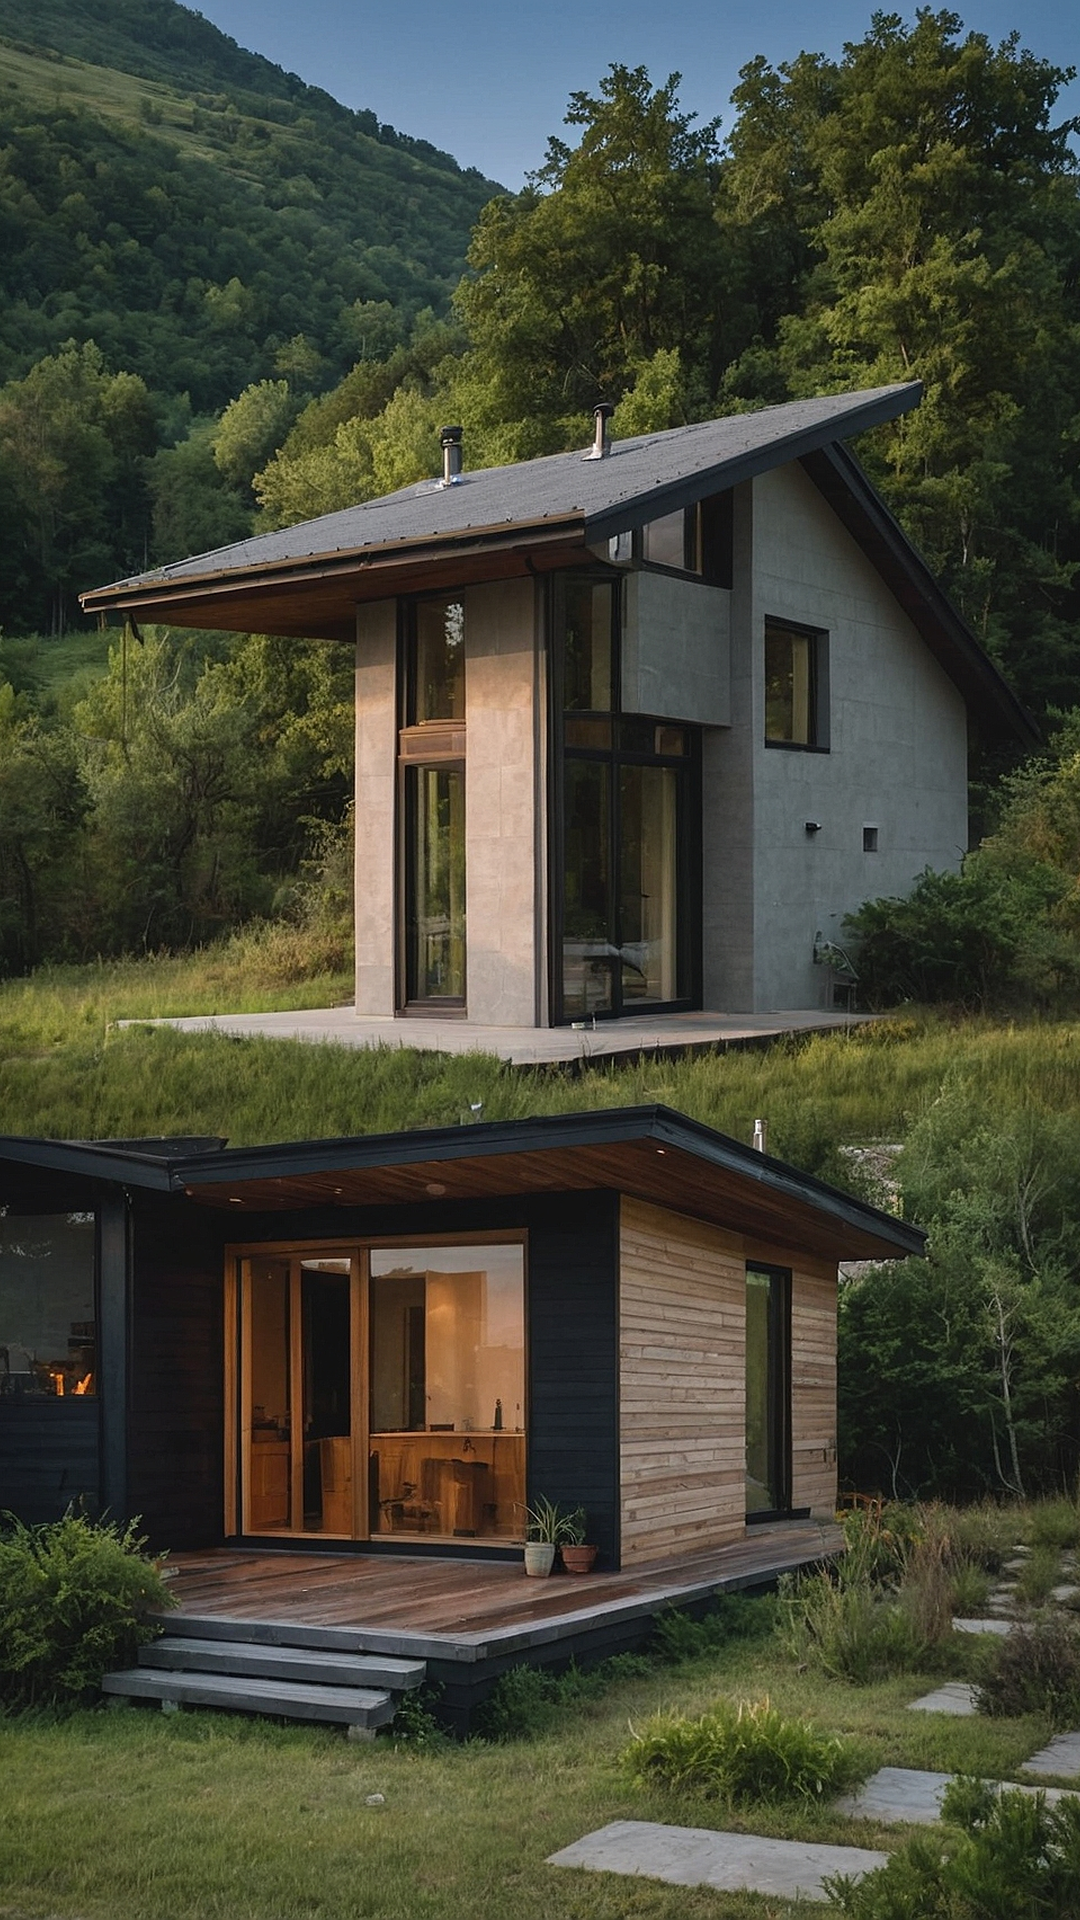 Modern Rustic Residences: Design Ideas for the Countryside